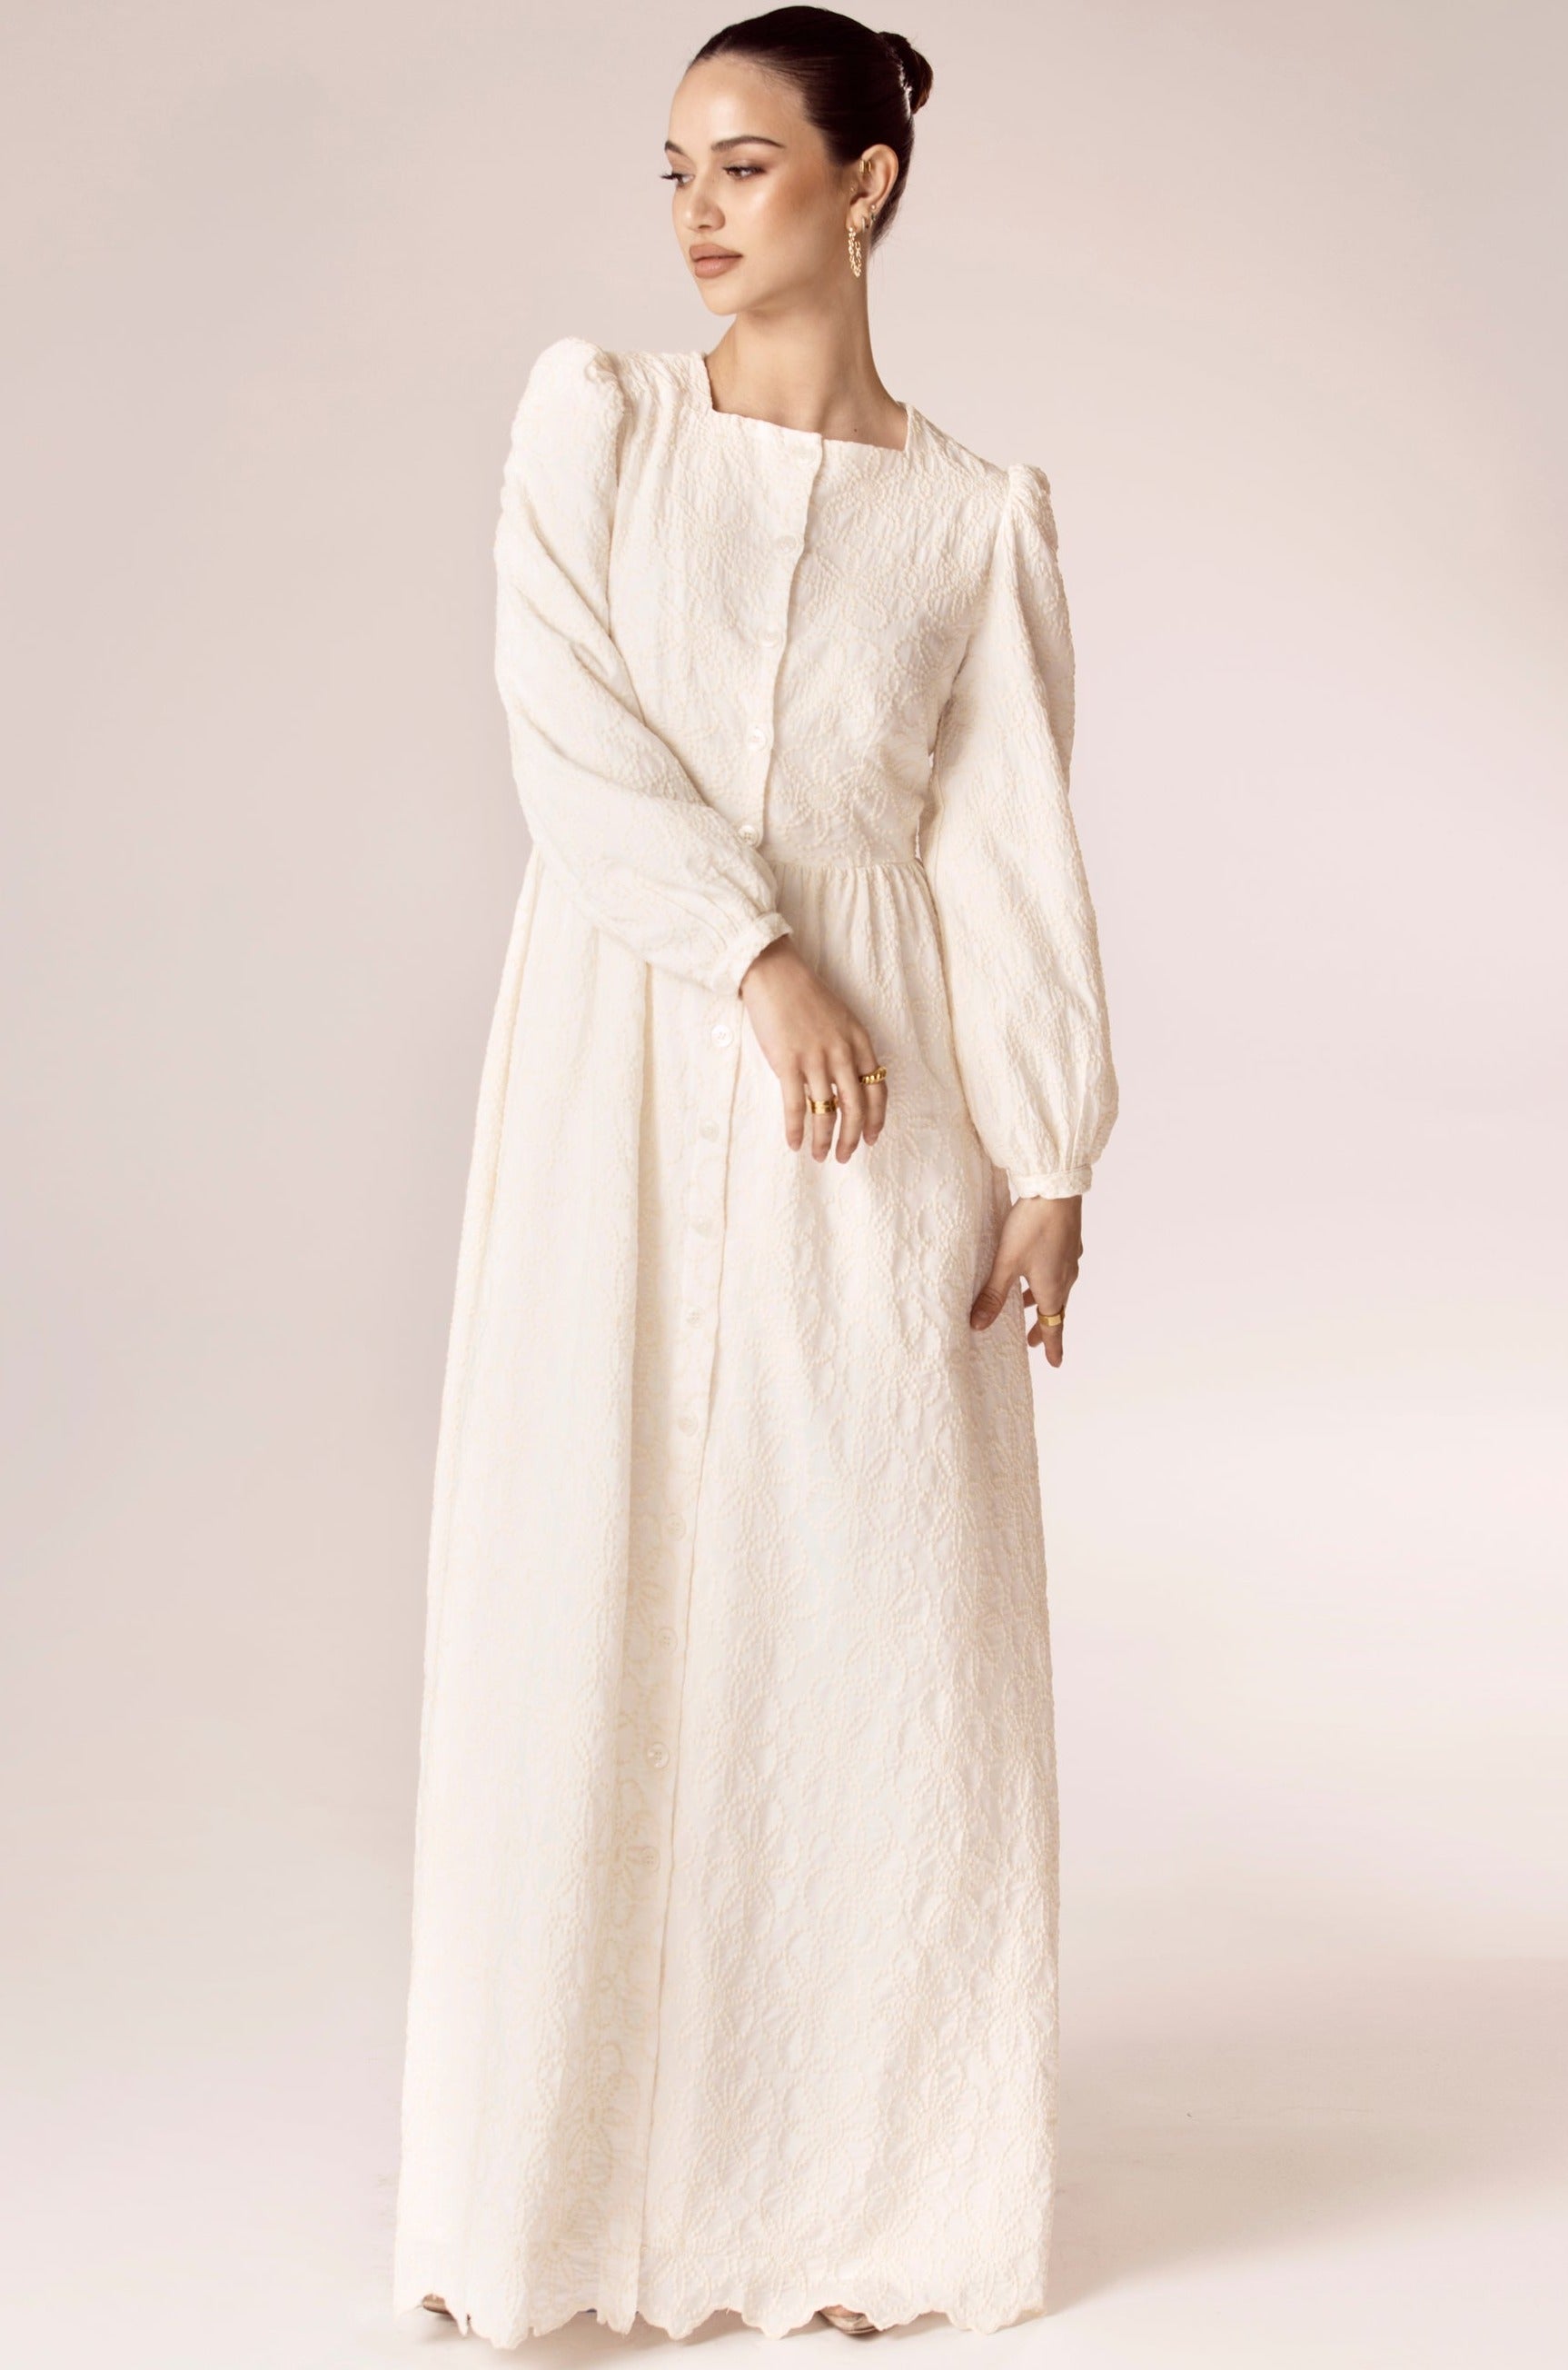 Andrea White Floral Lace Maxi Dress Veiled Collection 